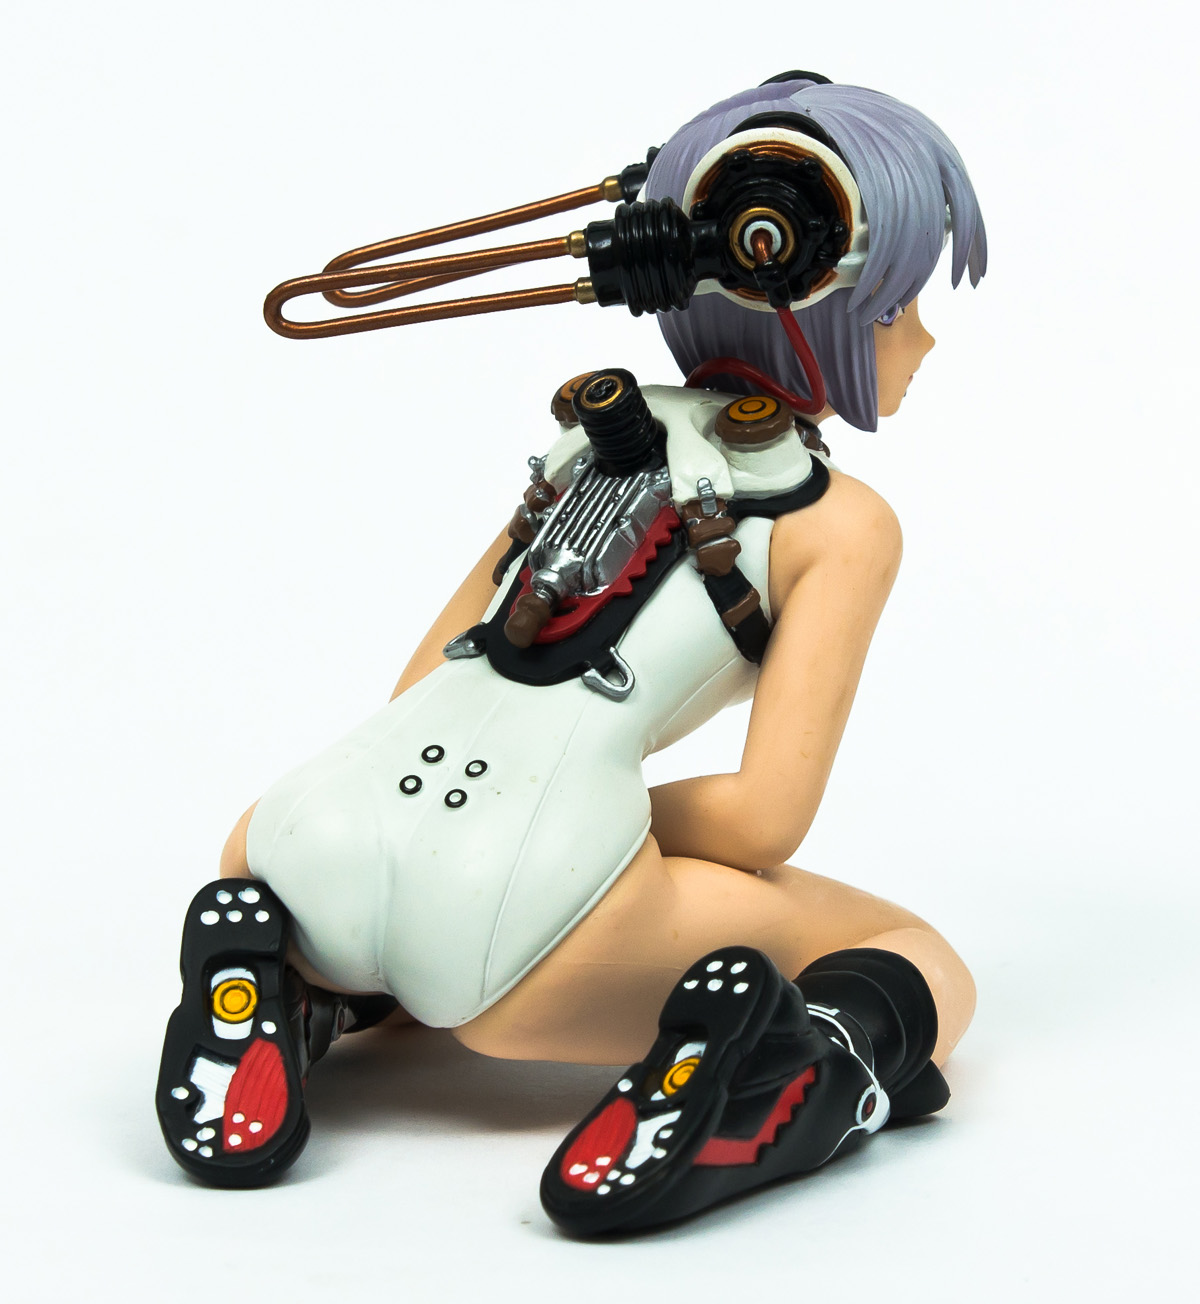 Kneeing Sexy Injection Figure - Anime Action Figure